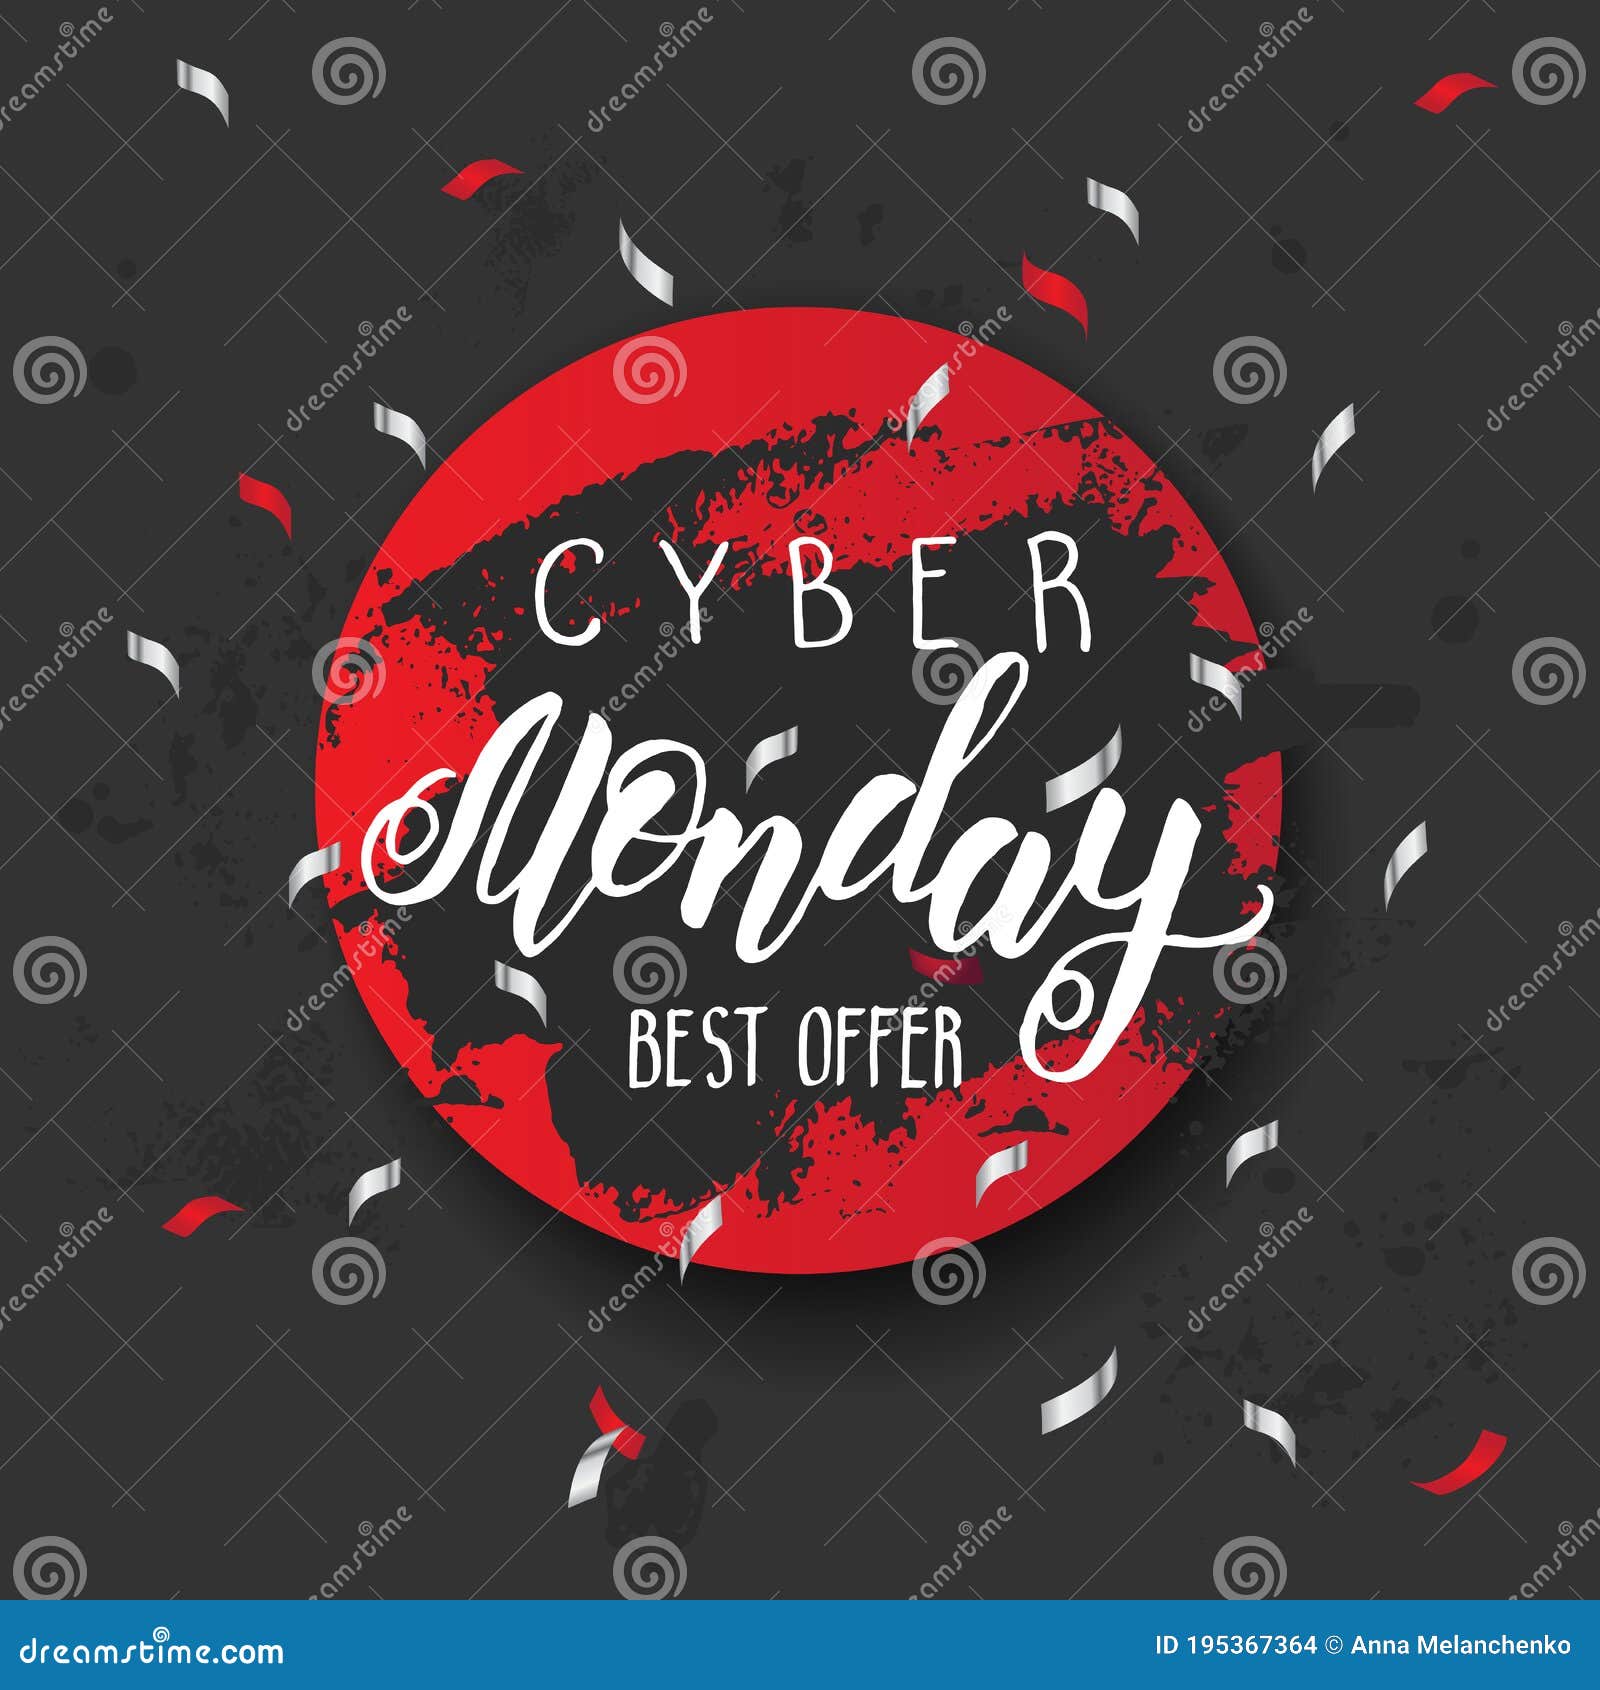 cyber monday sale banner with brush stroke and handwritting trendy lettering. best offer.  